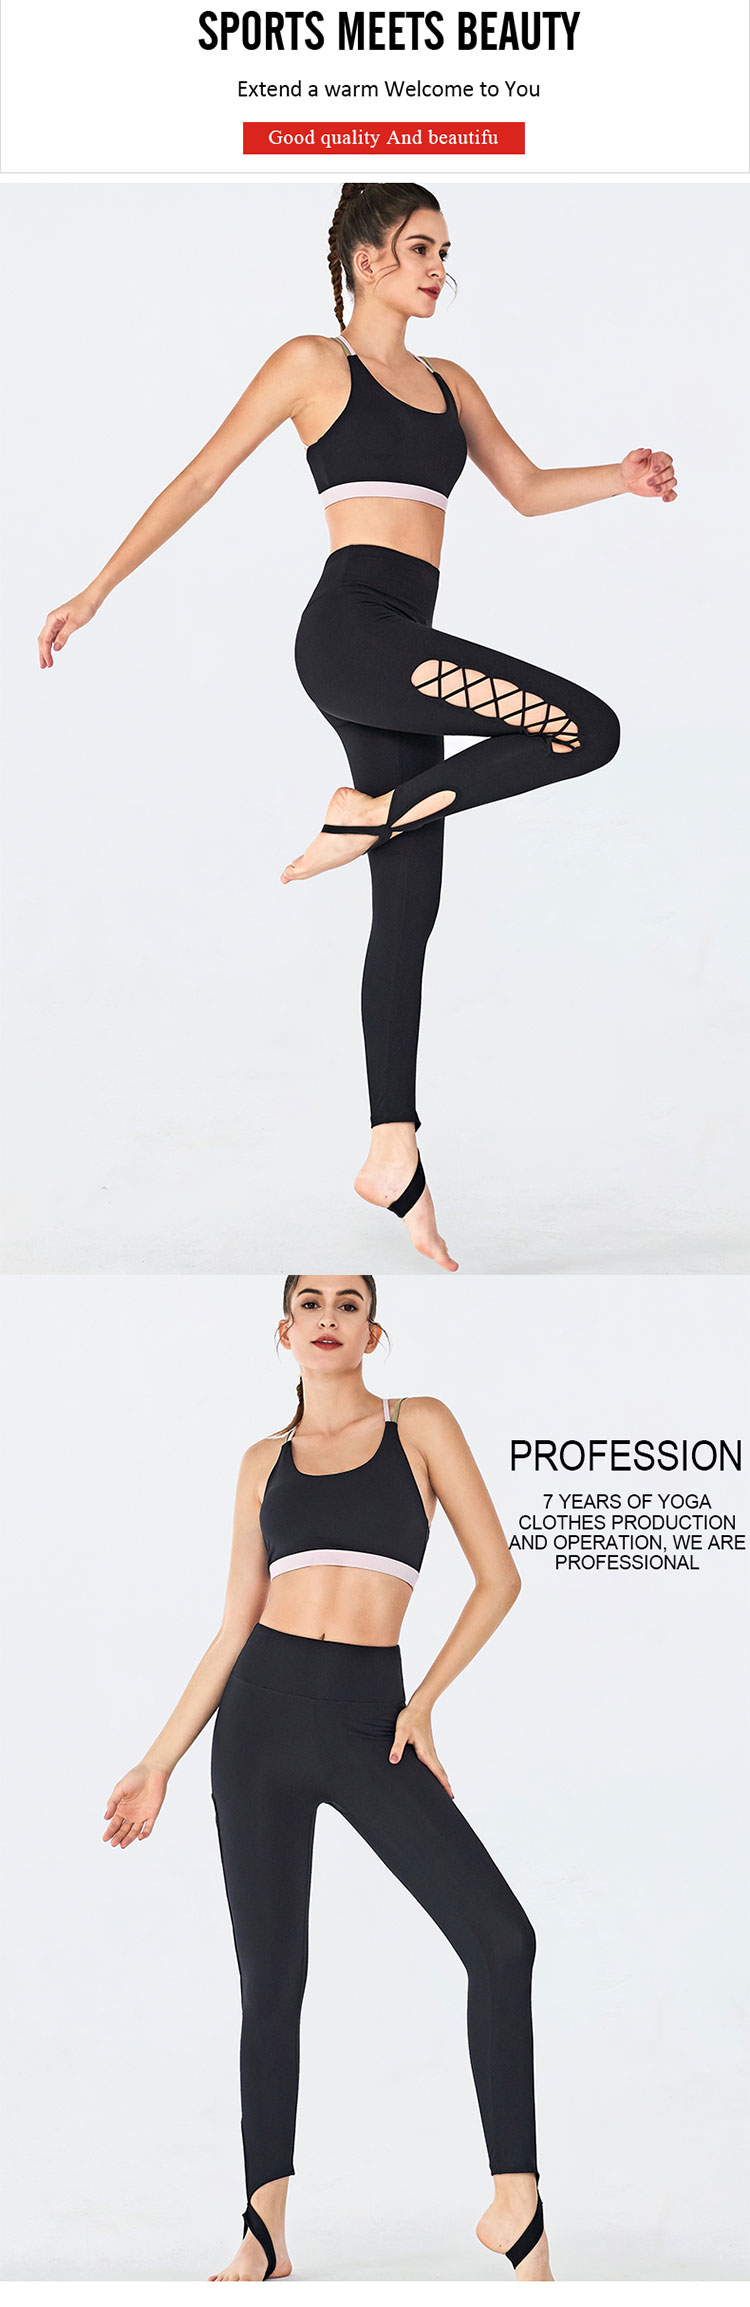 Workout-tights-is-the-advocated-item-aimed-at-young-market